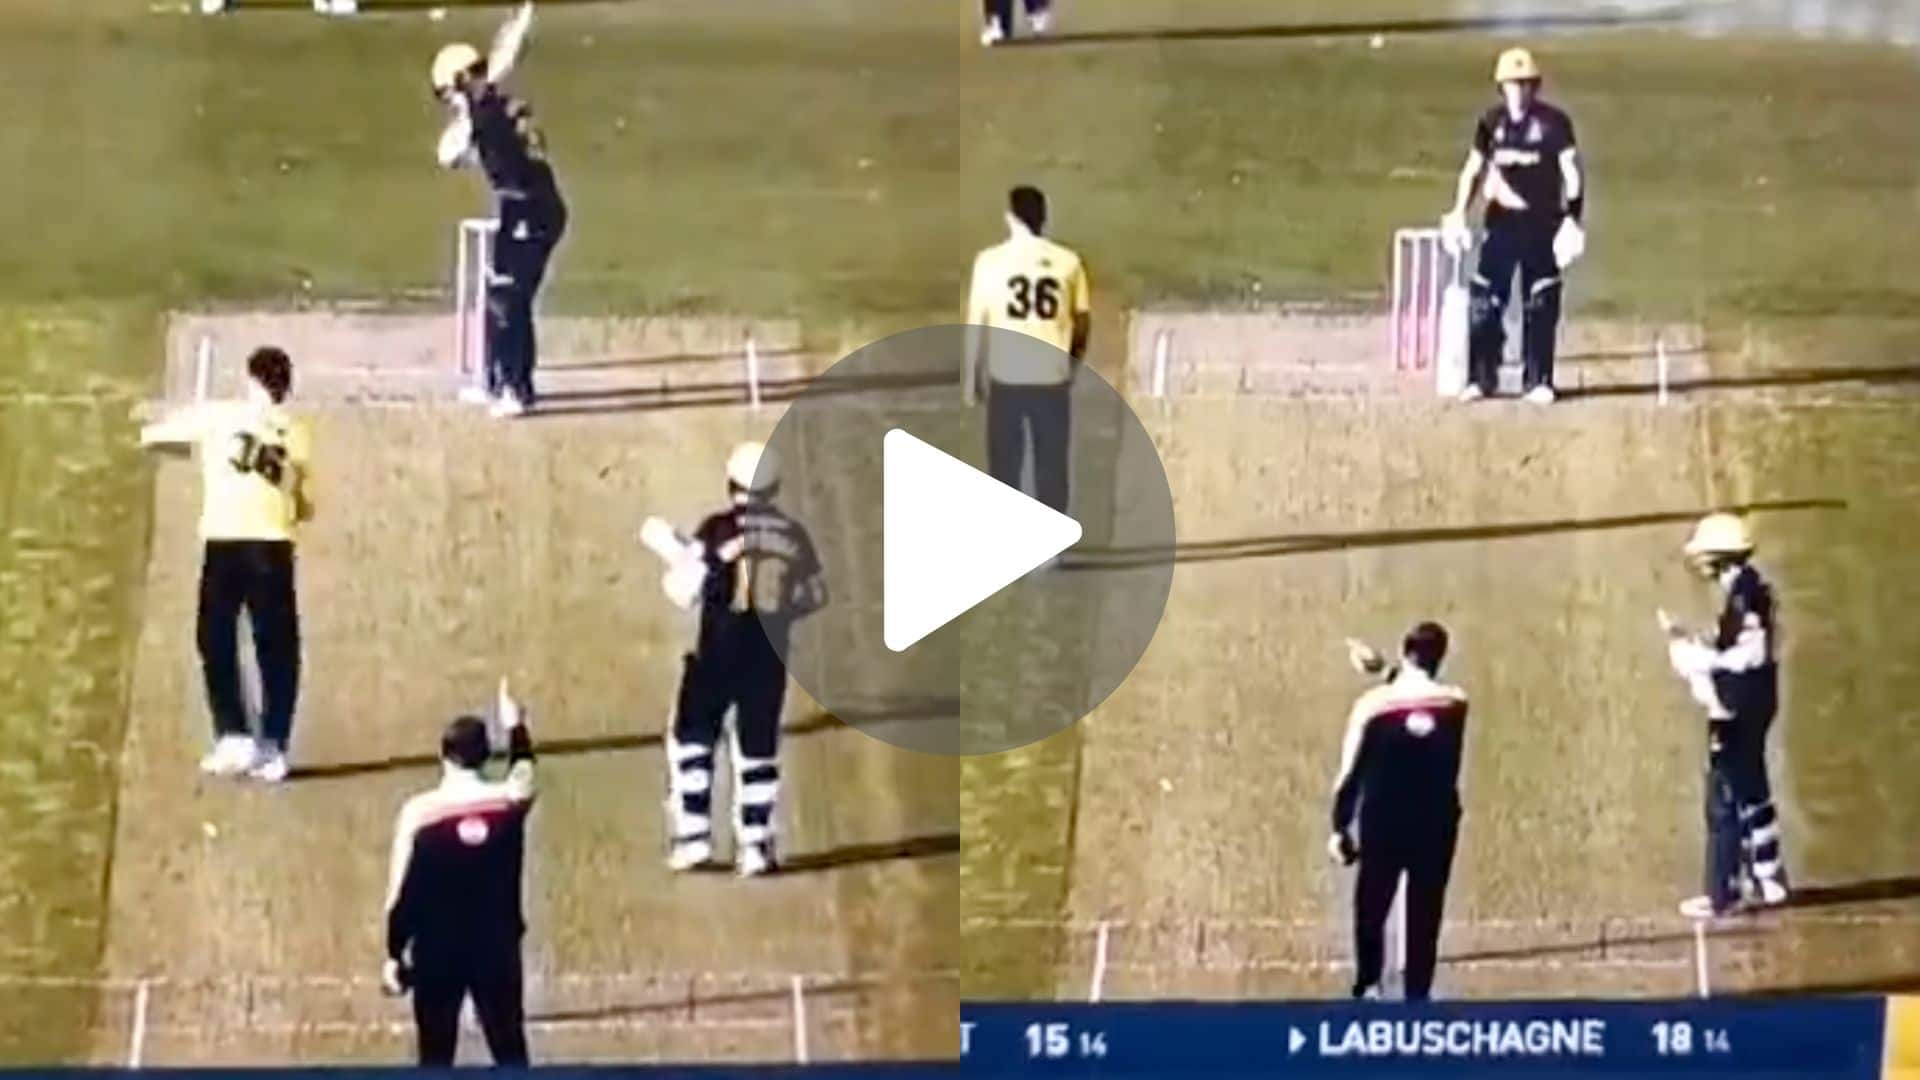 [Watch] Umpire Asks Labuschagne To Go Back As He Delays To Walk Off After A Soft Dismissal